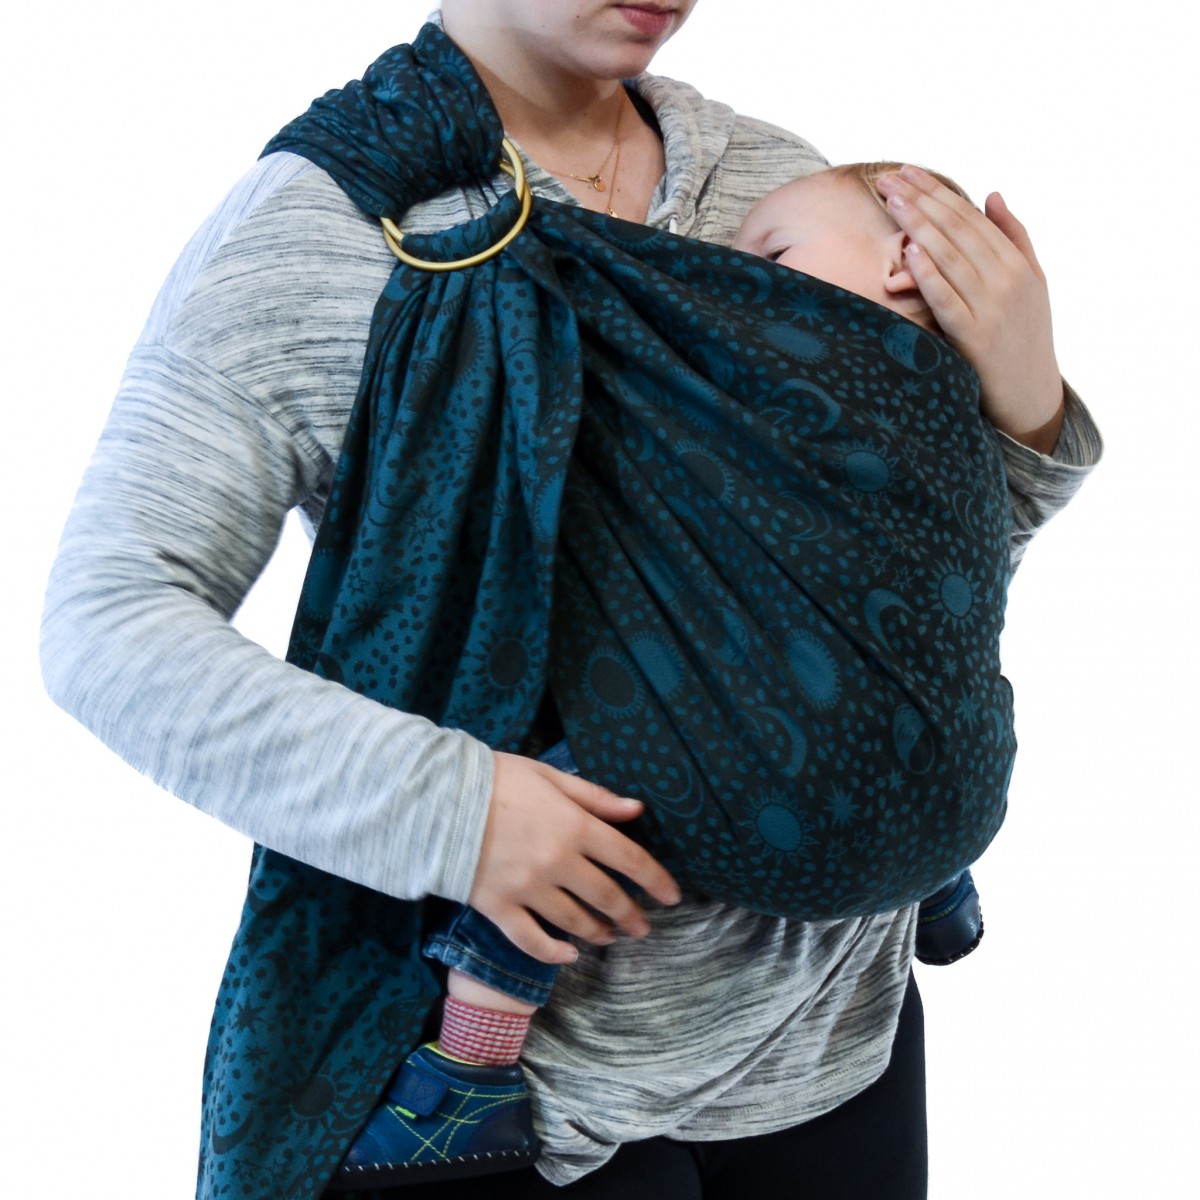 tula ring sling baby carrier review